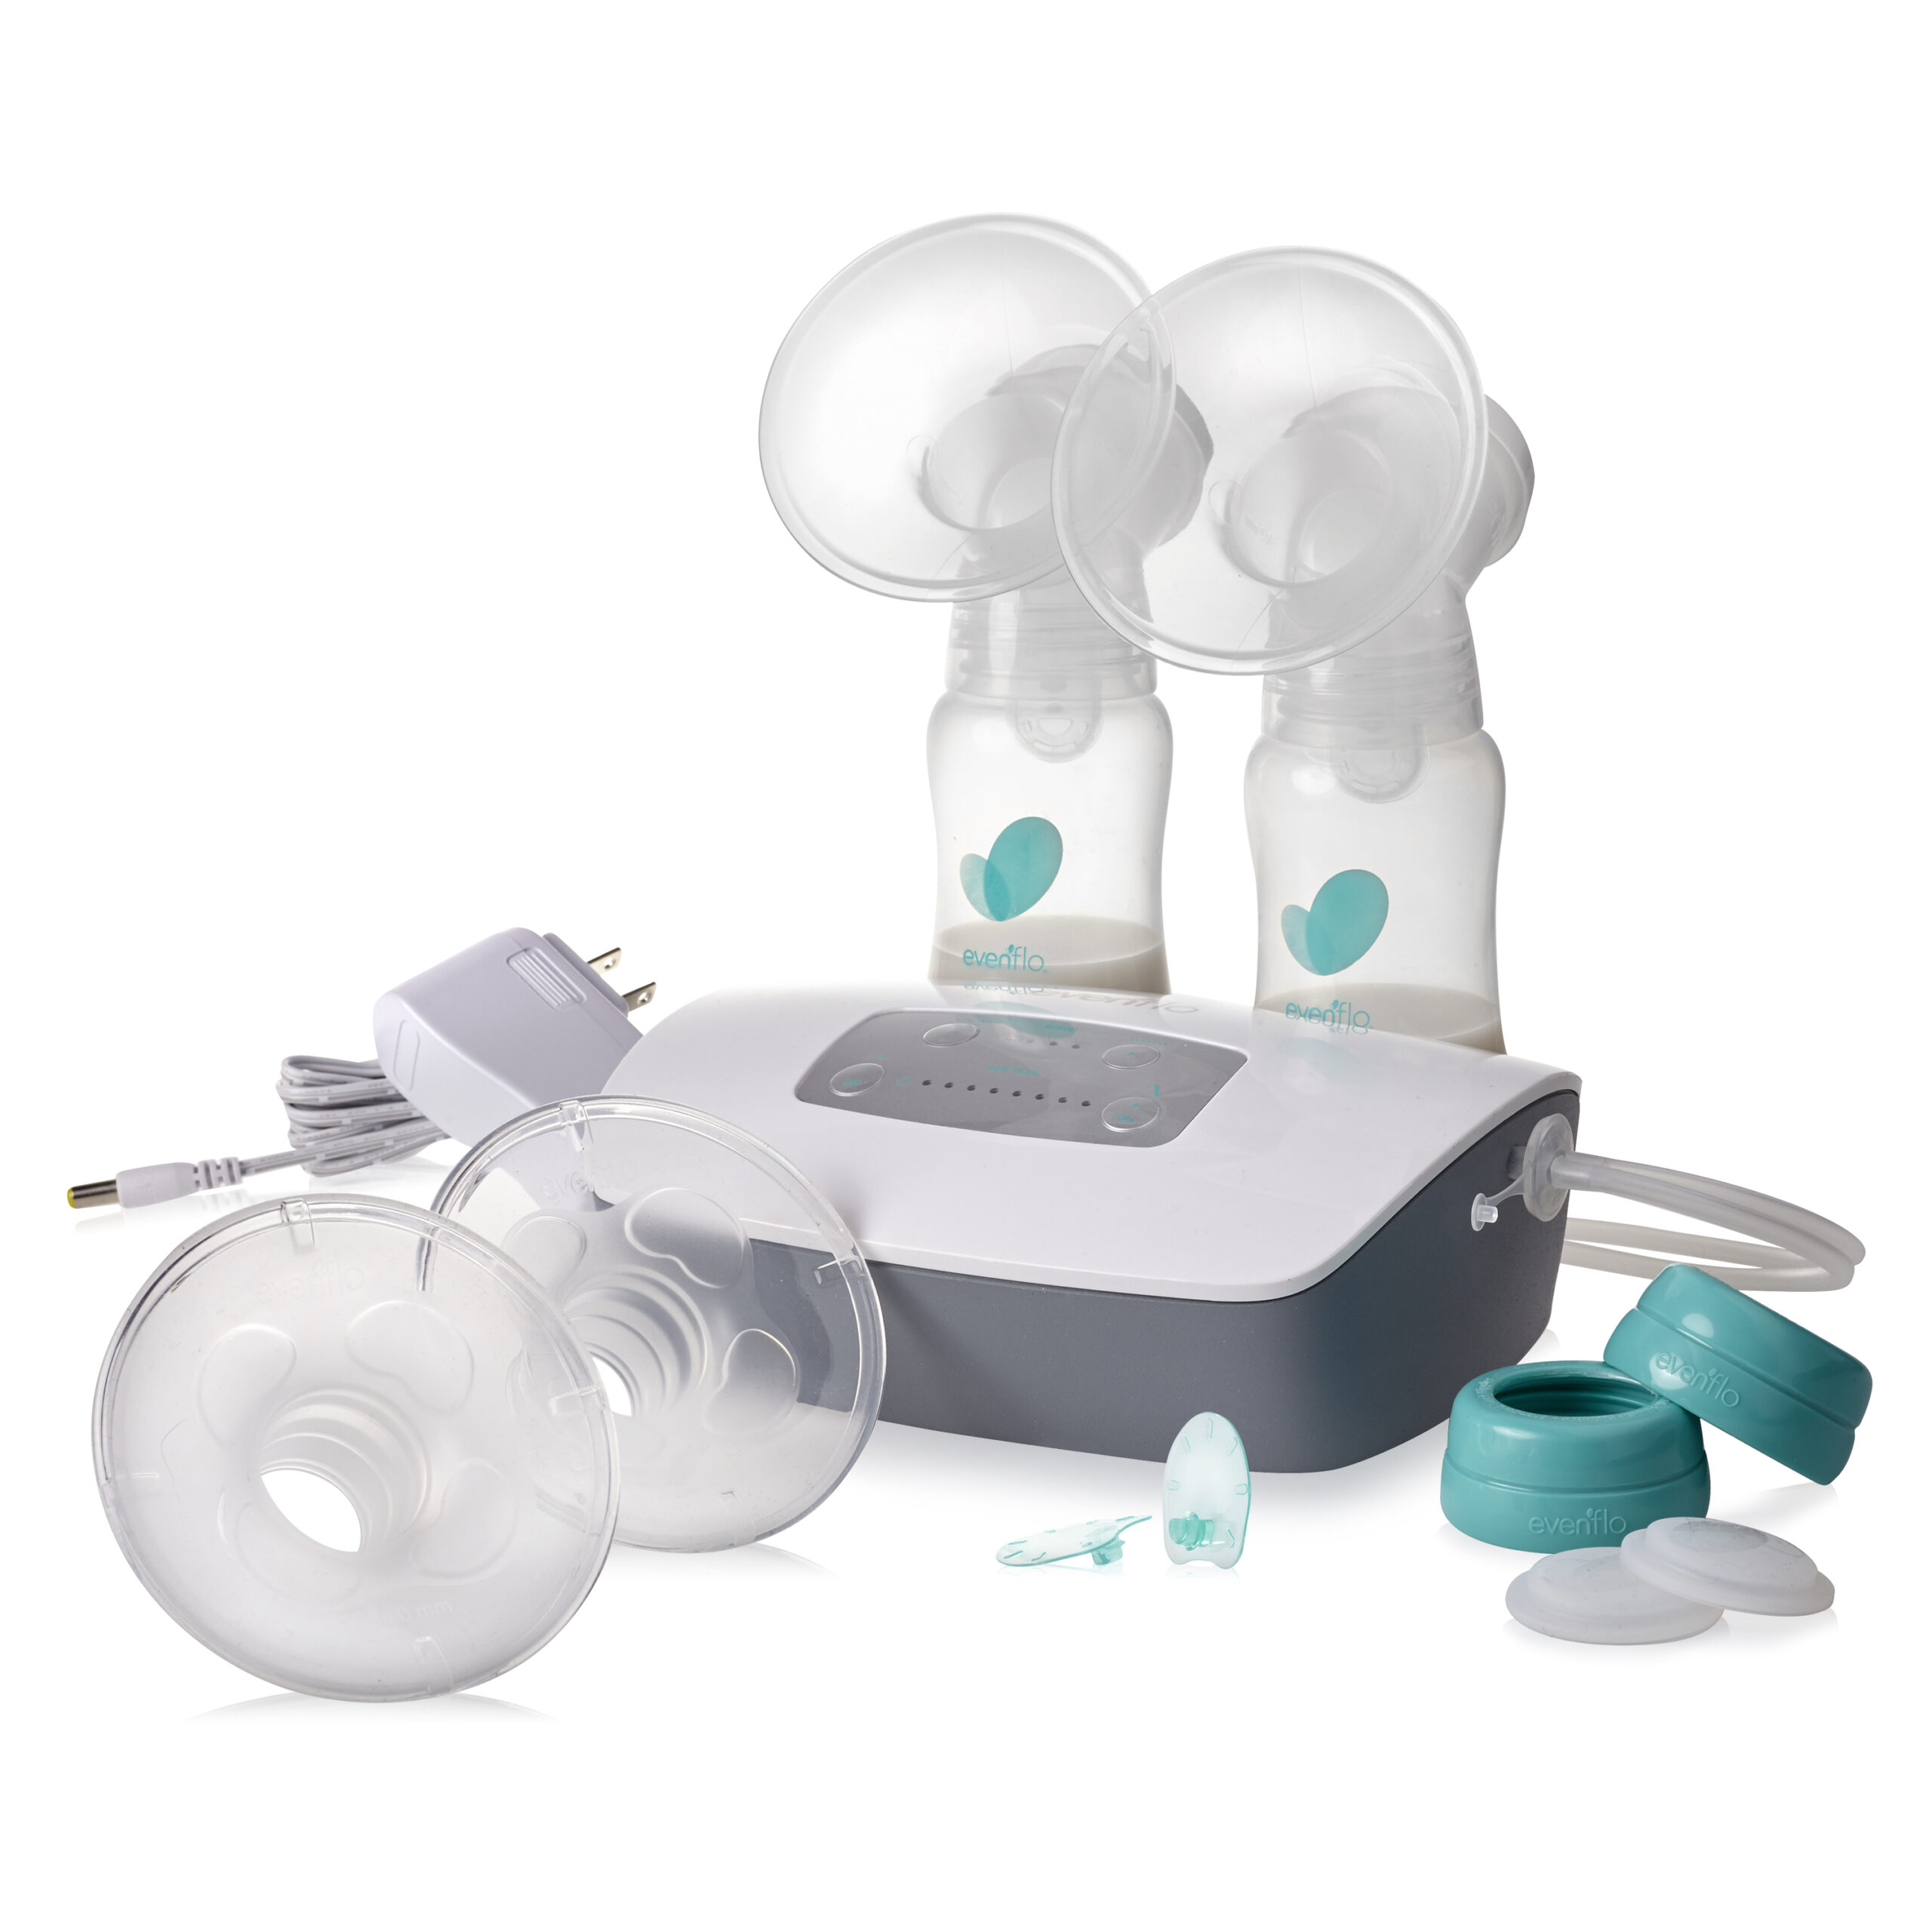 How to get ahold order breastpump thur caresource baypath humane society in hopkinton